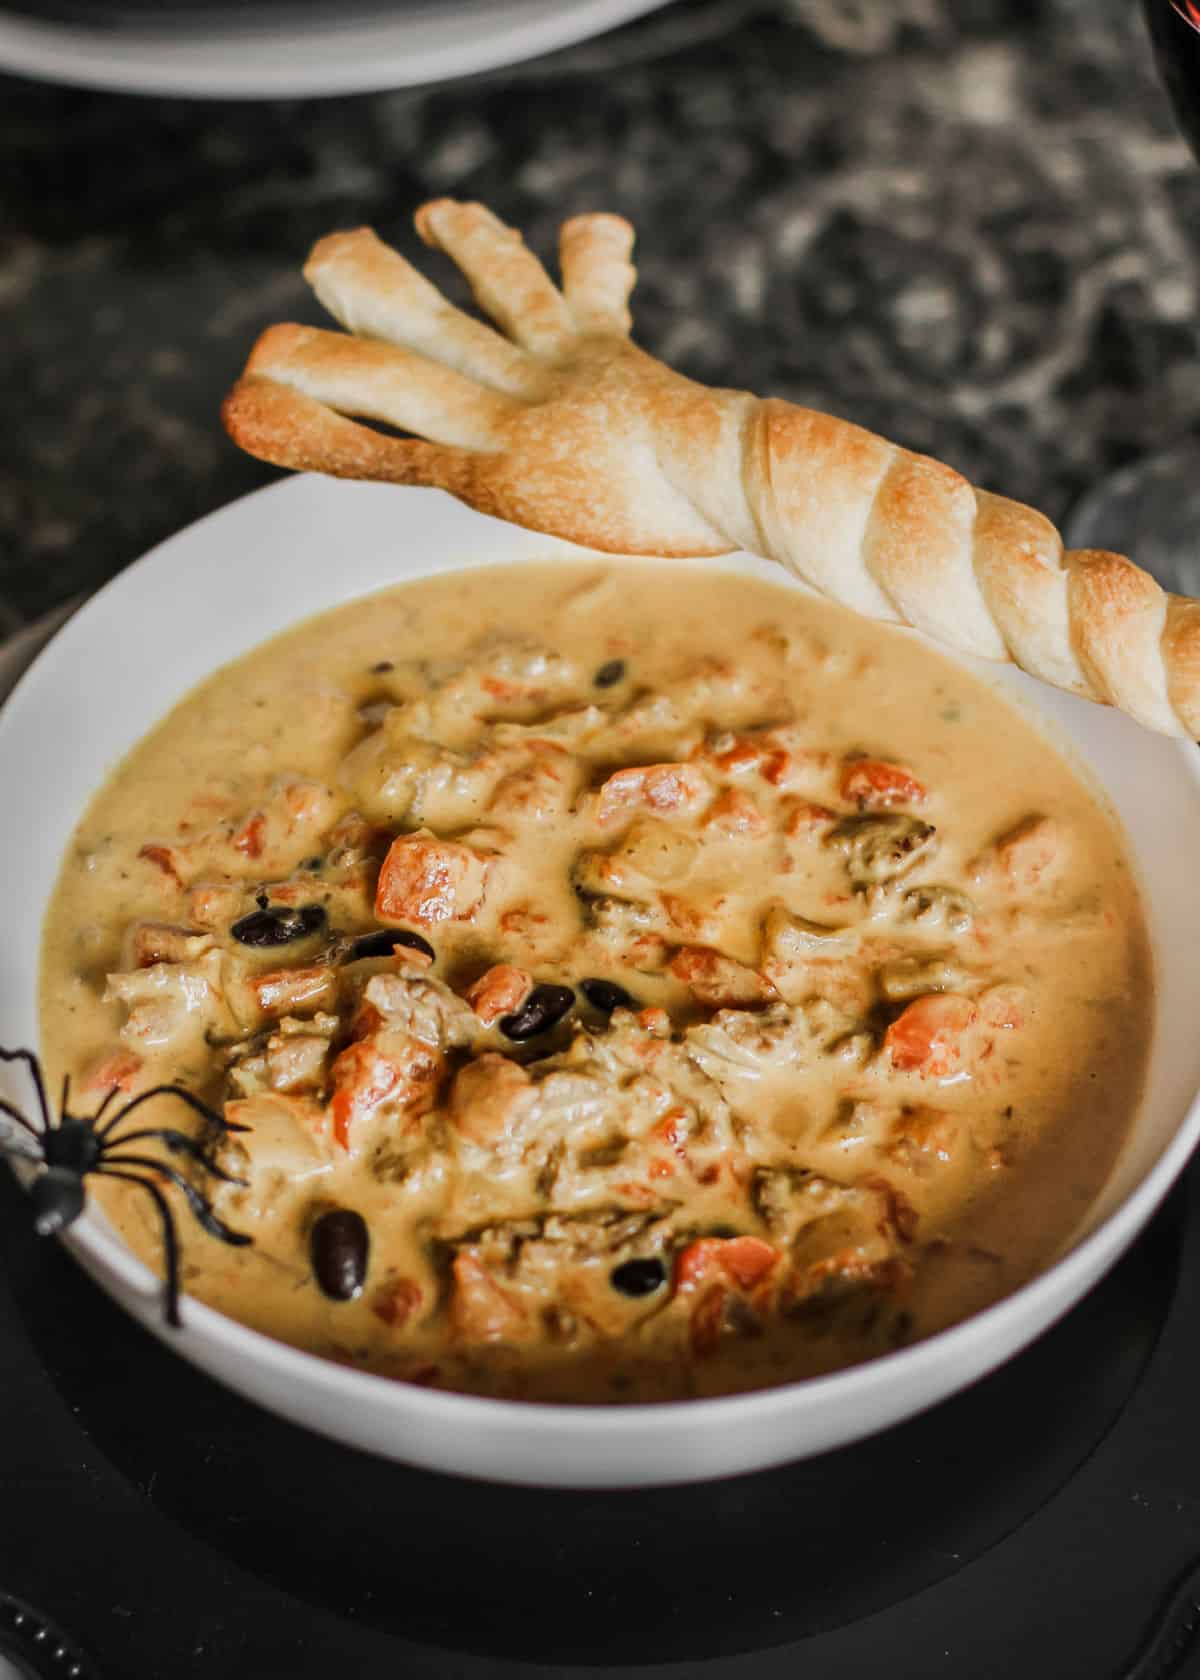 Halloween theme chili in white bowl with broom shaped breadstick and spider decoration.